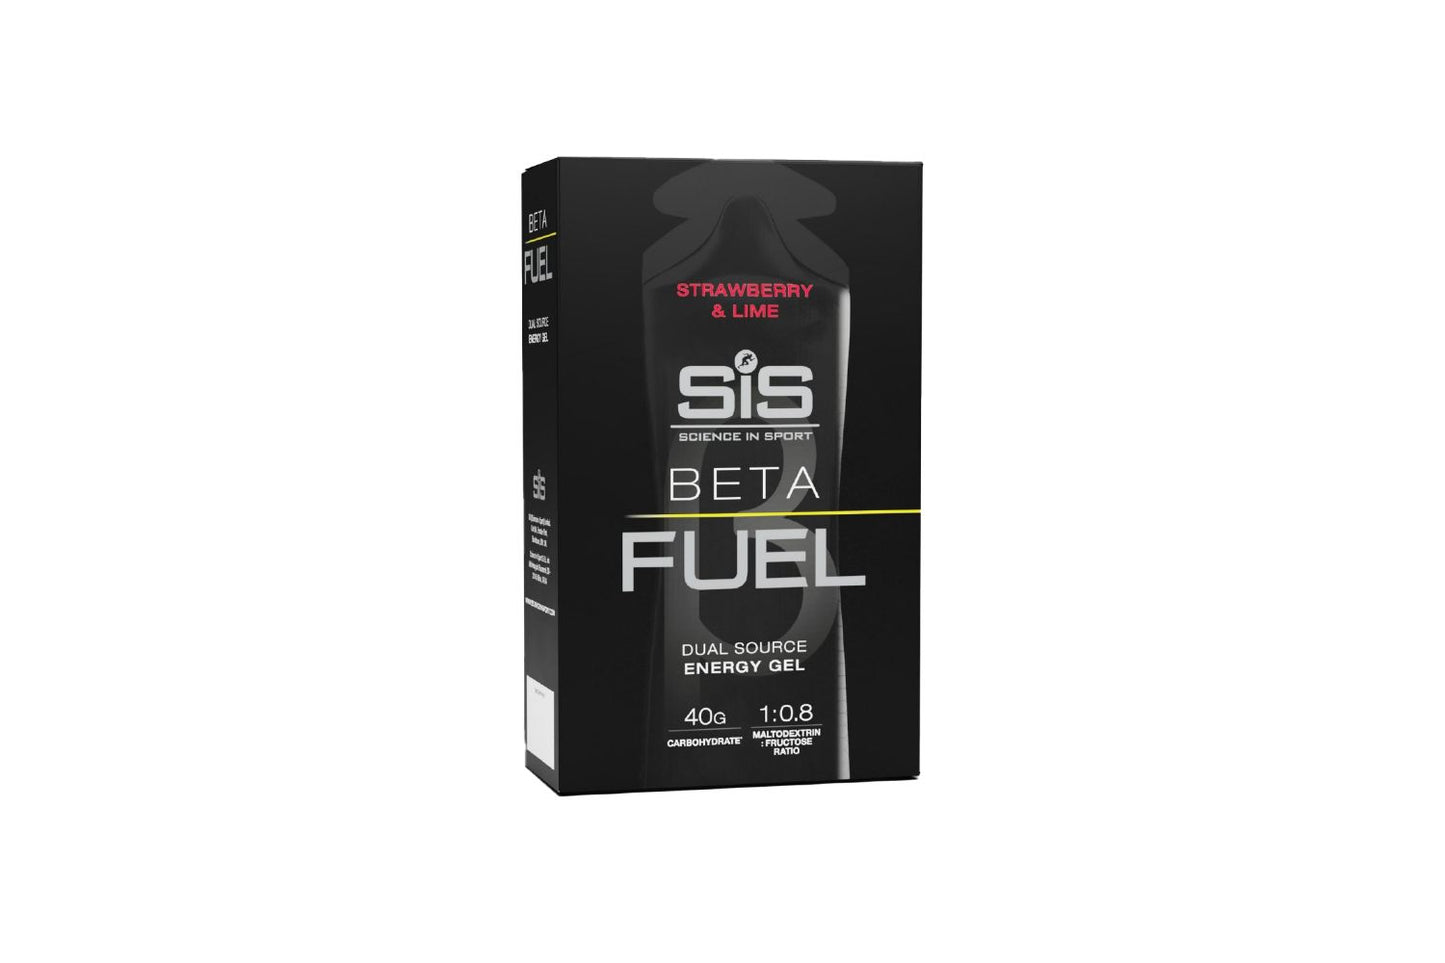 SIS Cycling Nutrition Carbohydrate Gel